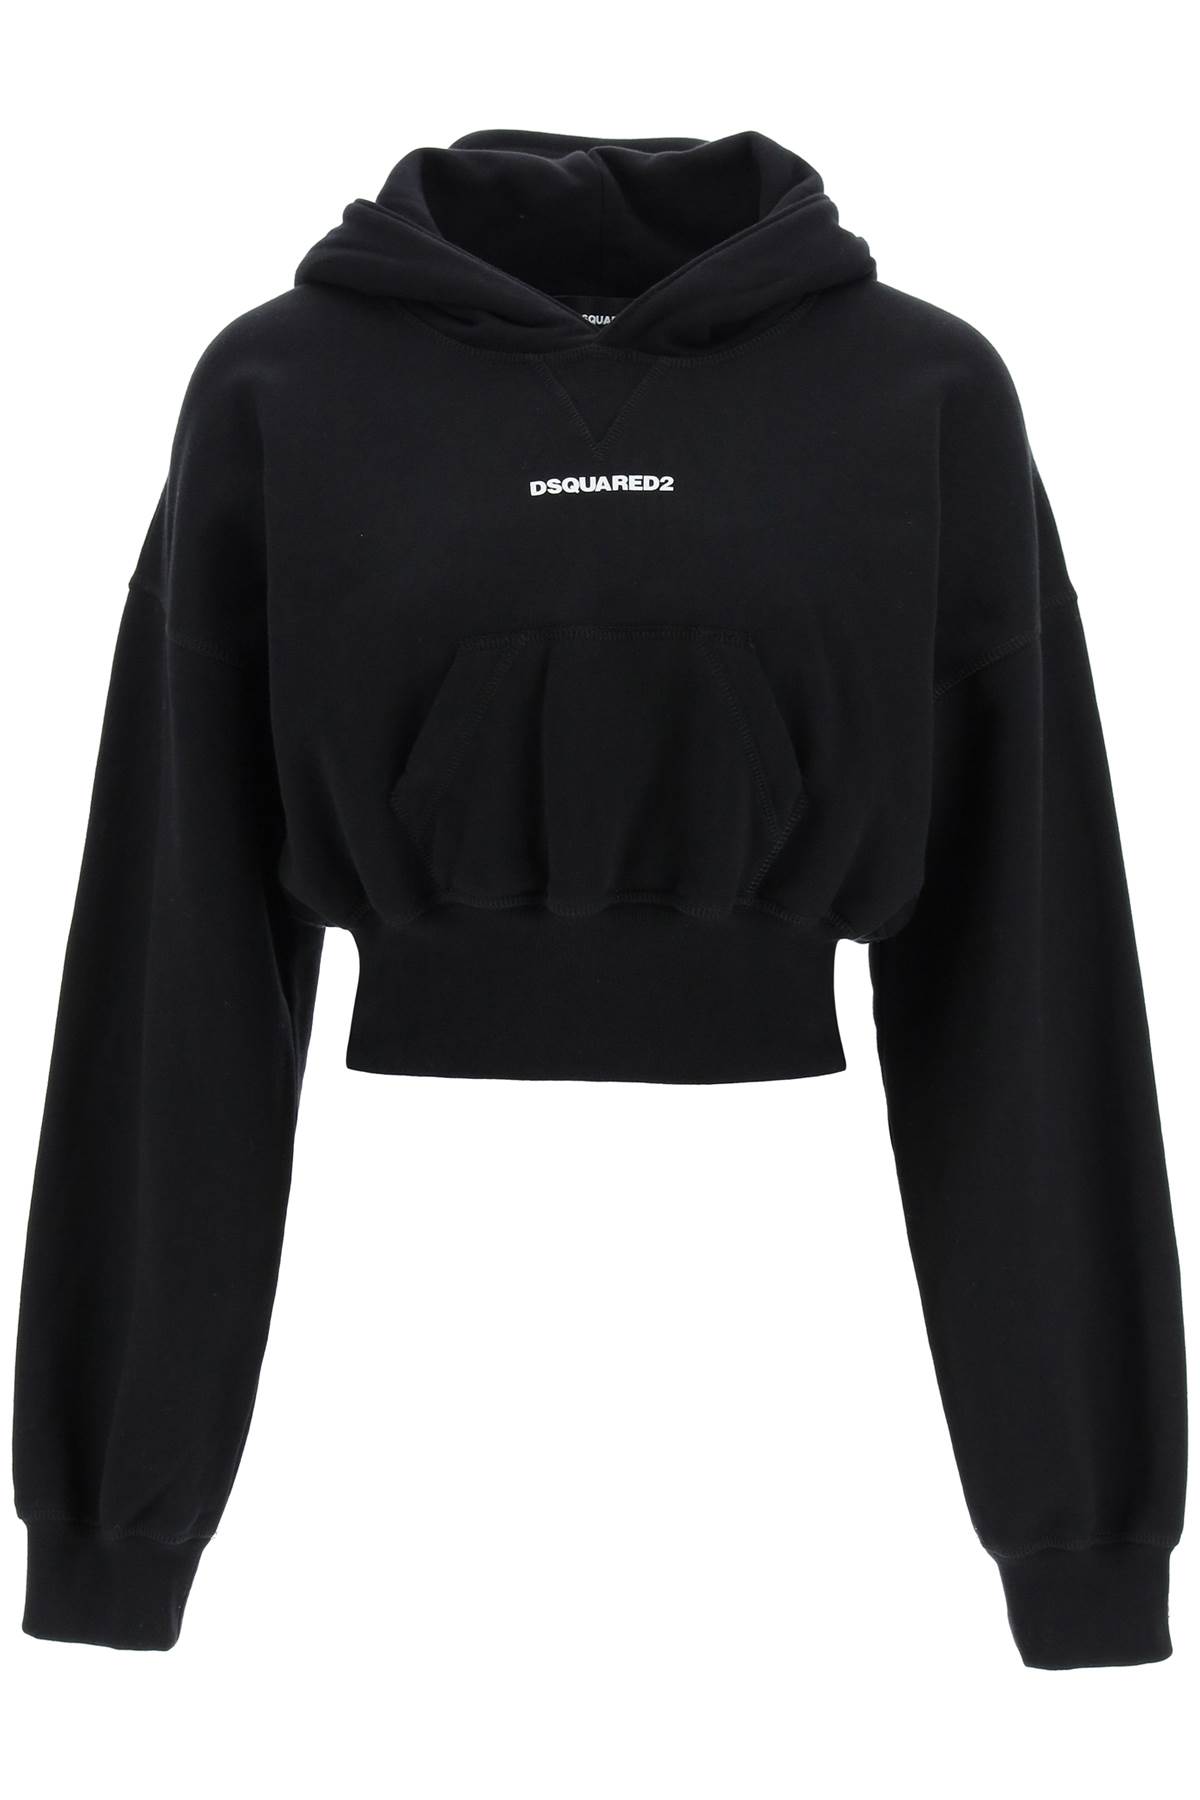 Dsquared2 Cropped Hoodie With Baseball Cap In Black